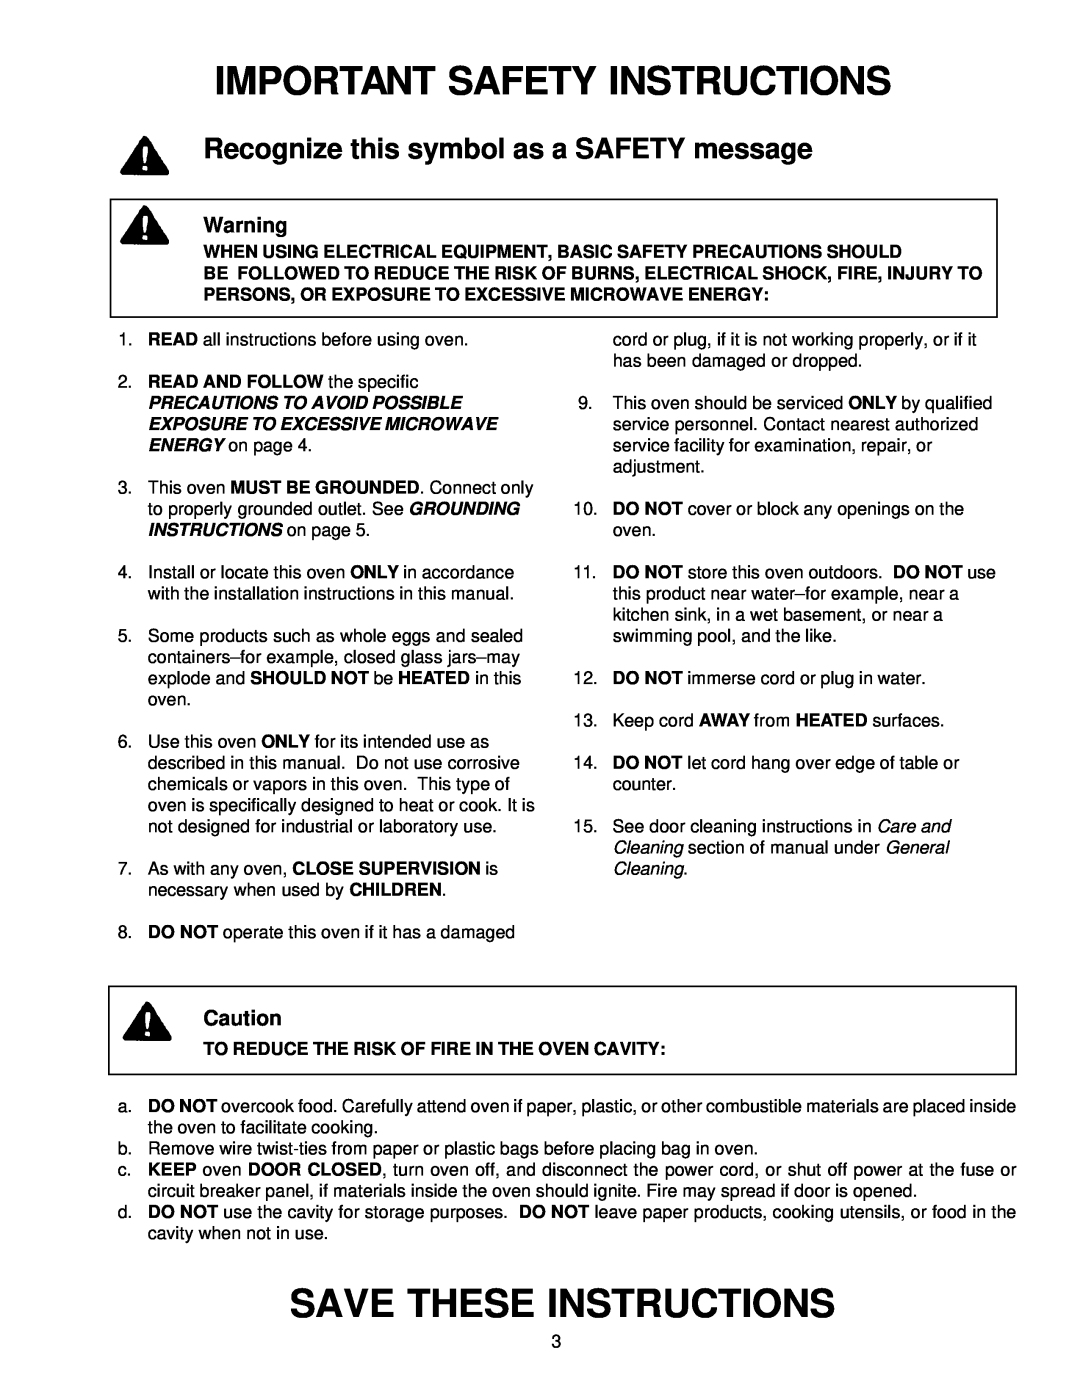 Amana CW76T, CE76T Important Safety Instructions, Save These Instructions, Recognize this symbol as a SAFETY message 